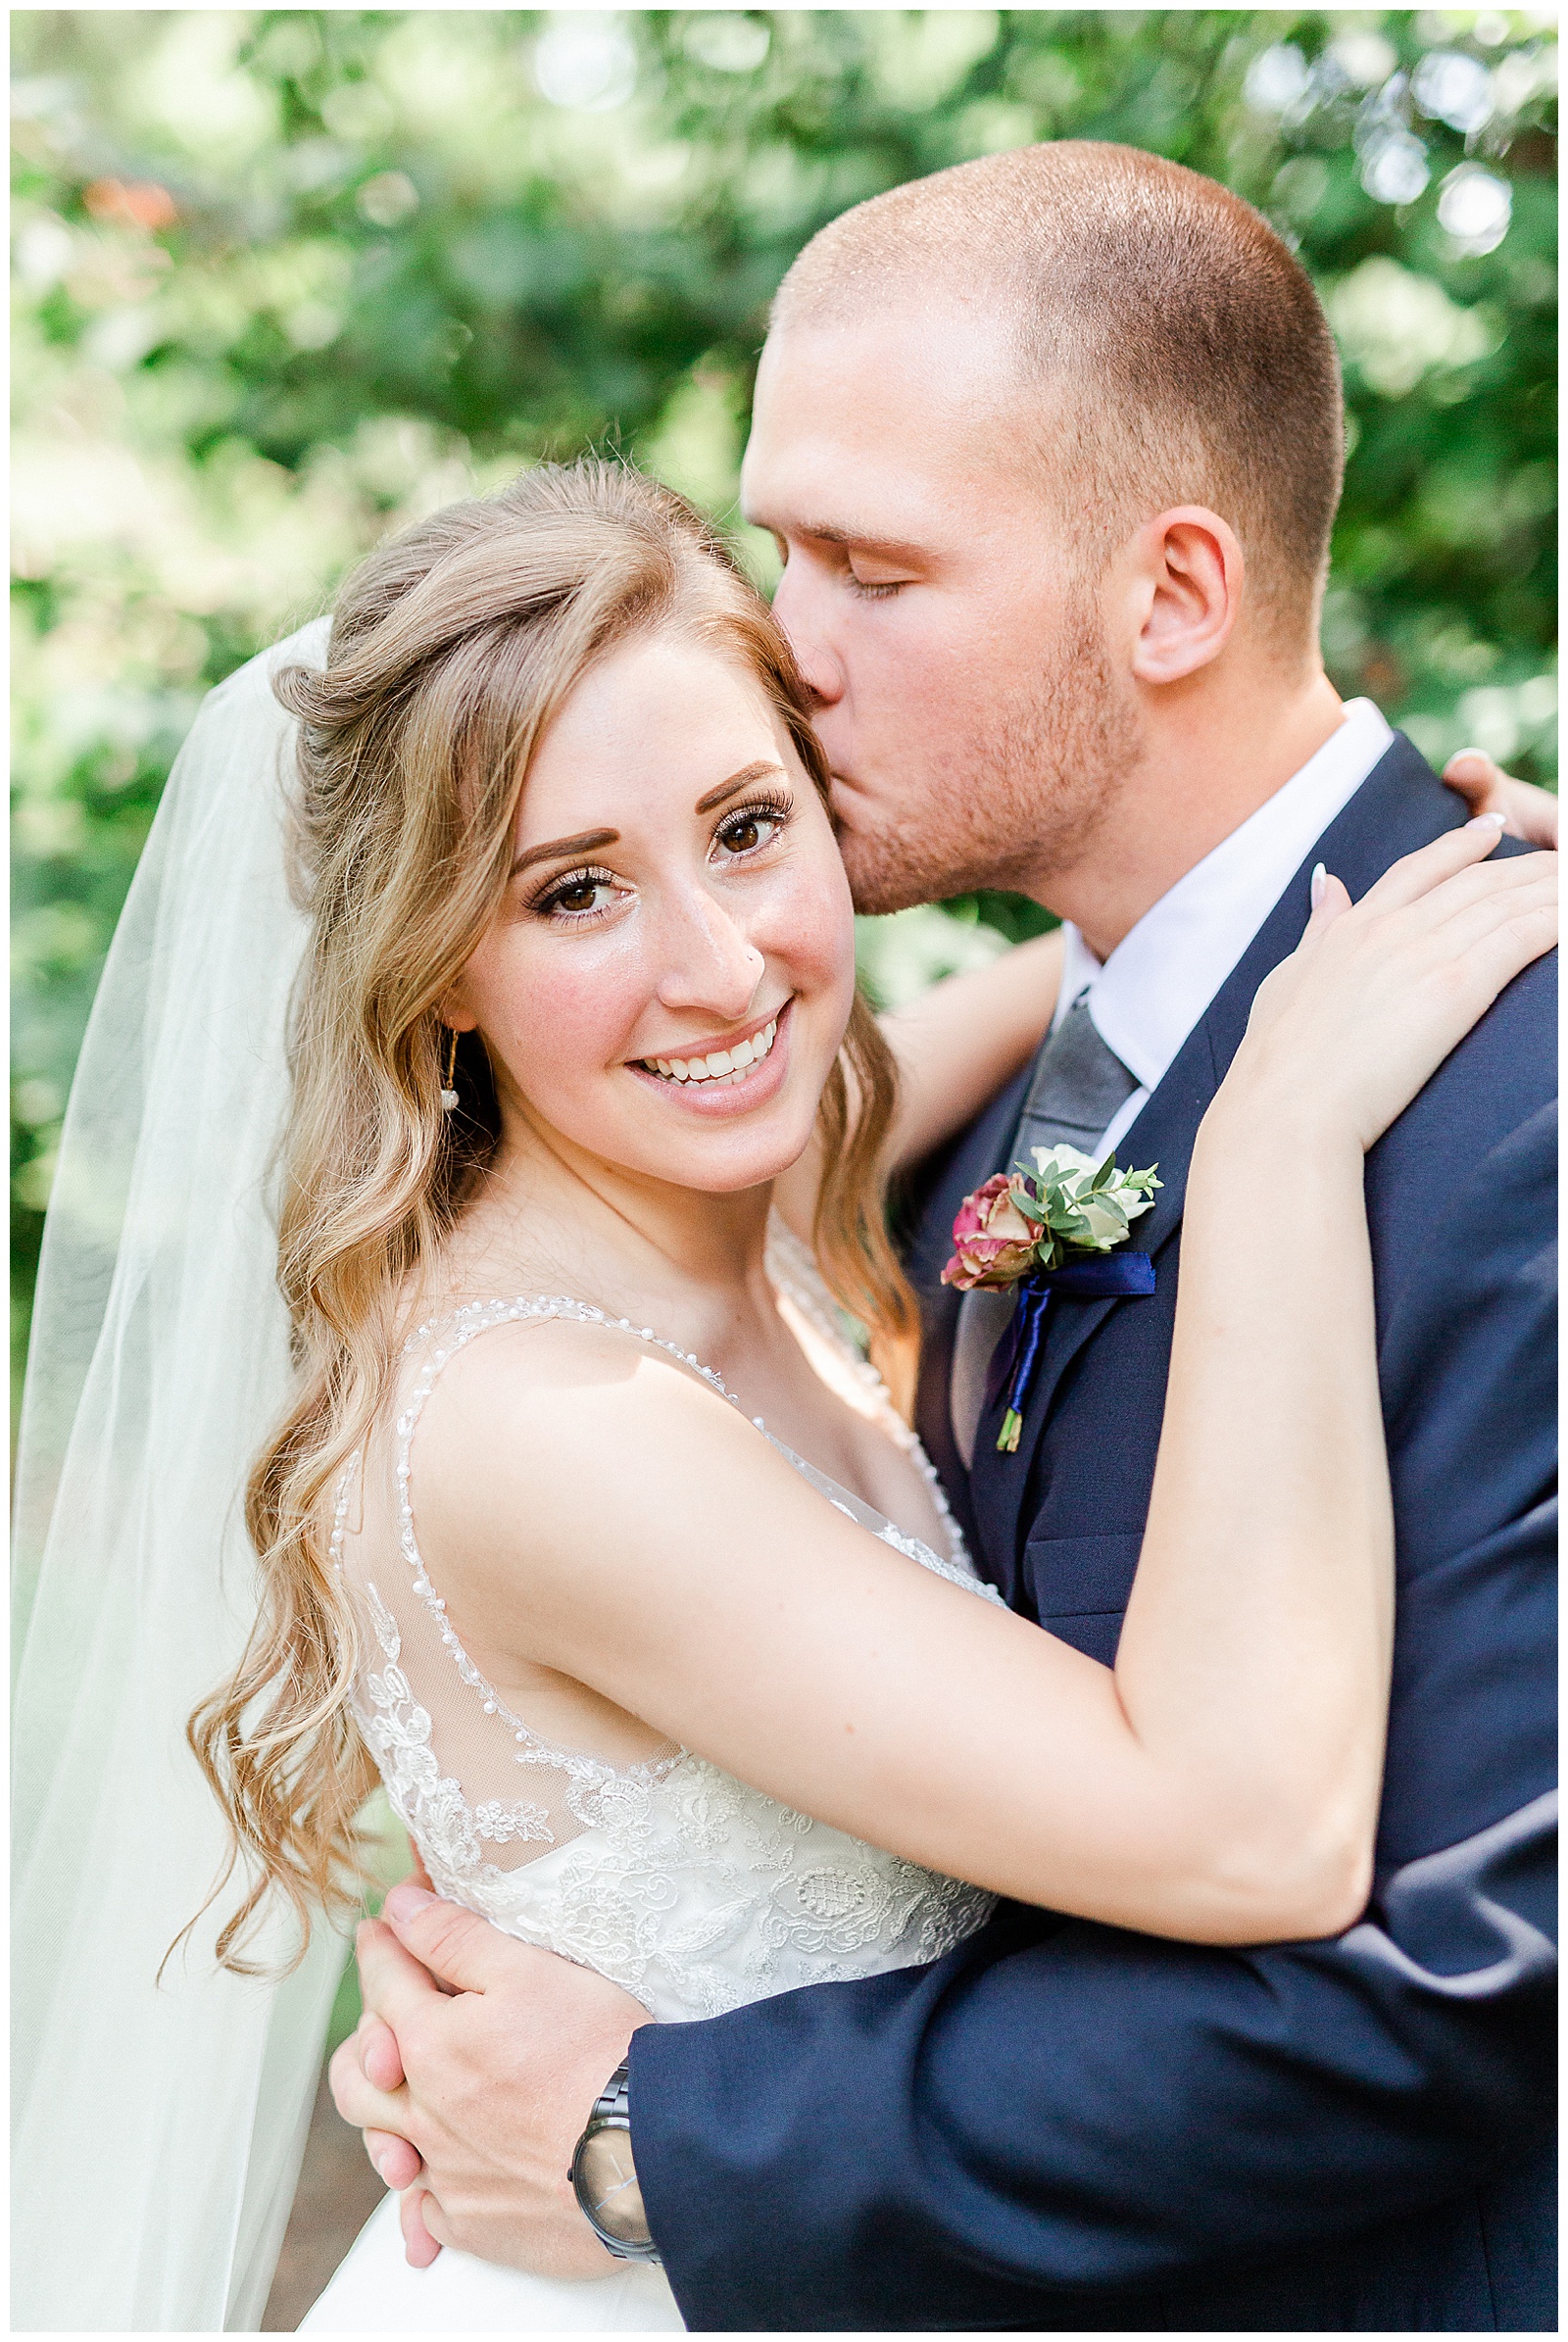 Simple V-Neck Lace wedding dress and dapper groom in blue-gray suit from Elegant Modern Summer Wedding in Charlotte, NC | check out the full wedding at KevynDixonPhoto.com